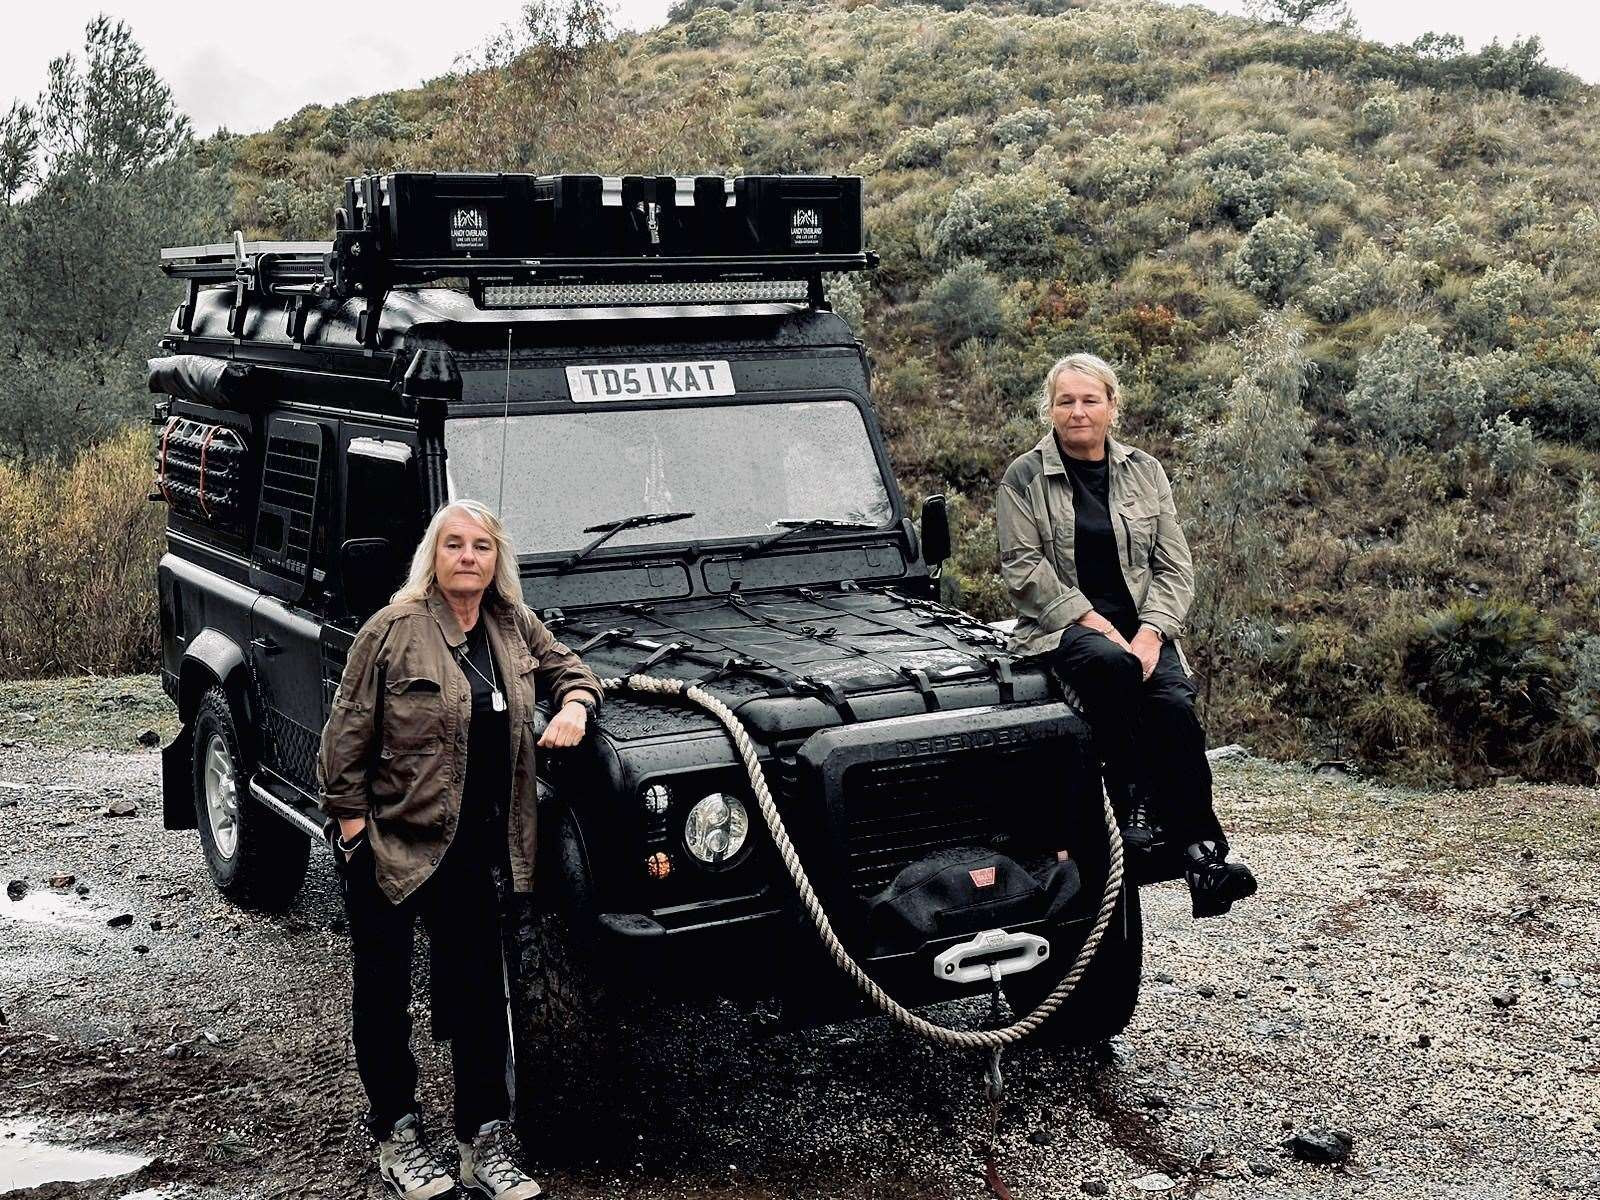 The old lady U60 turned a billion-dollar Land Rover into a mobile home to travel around Africa - Photo 2.